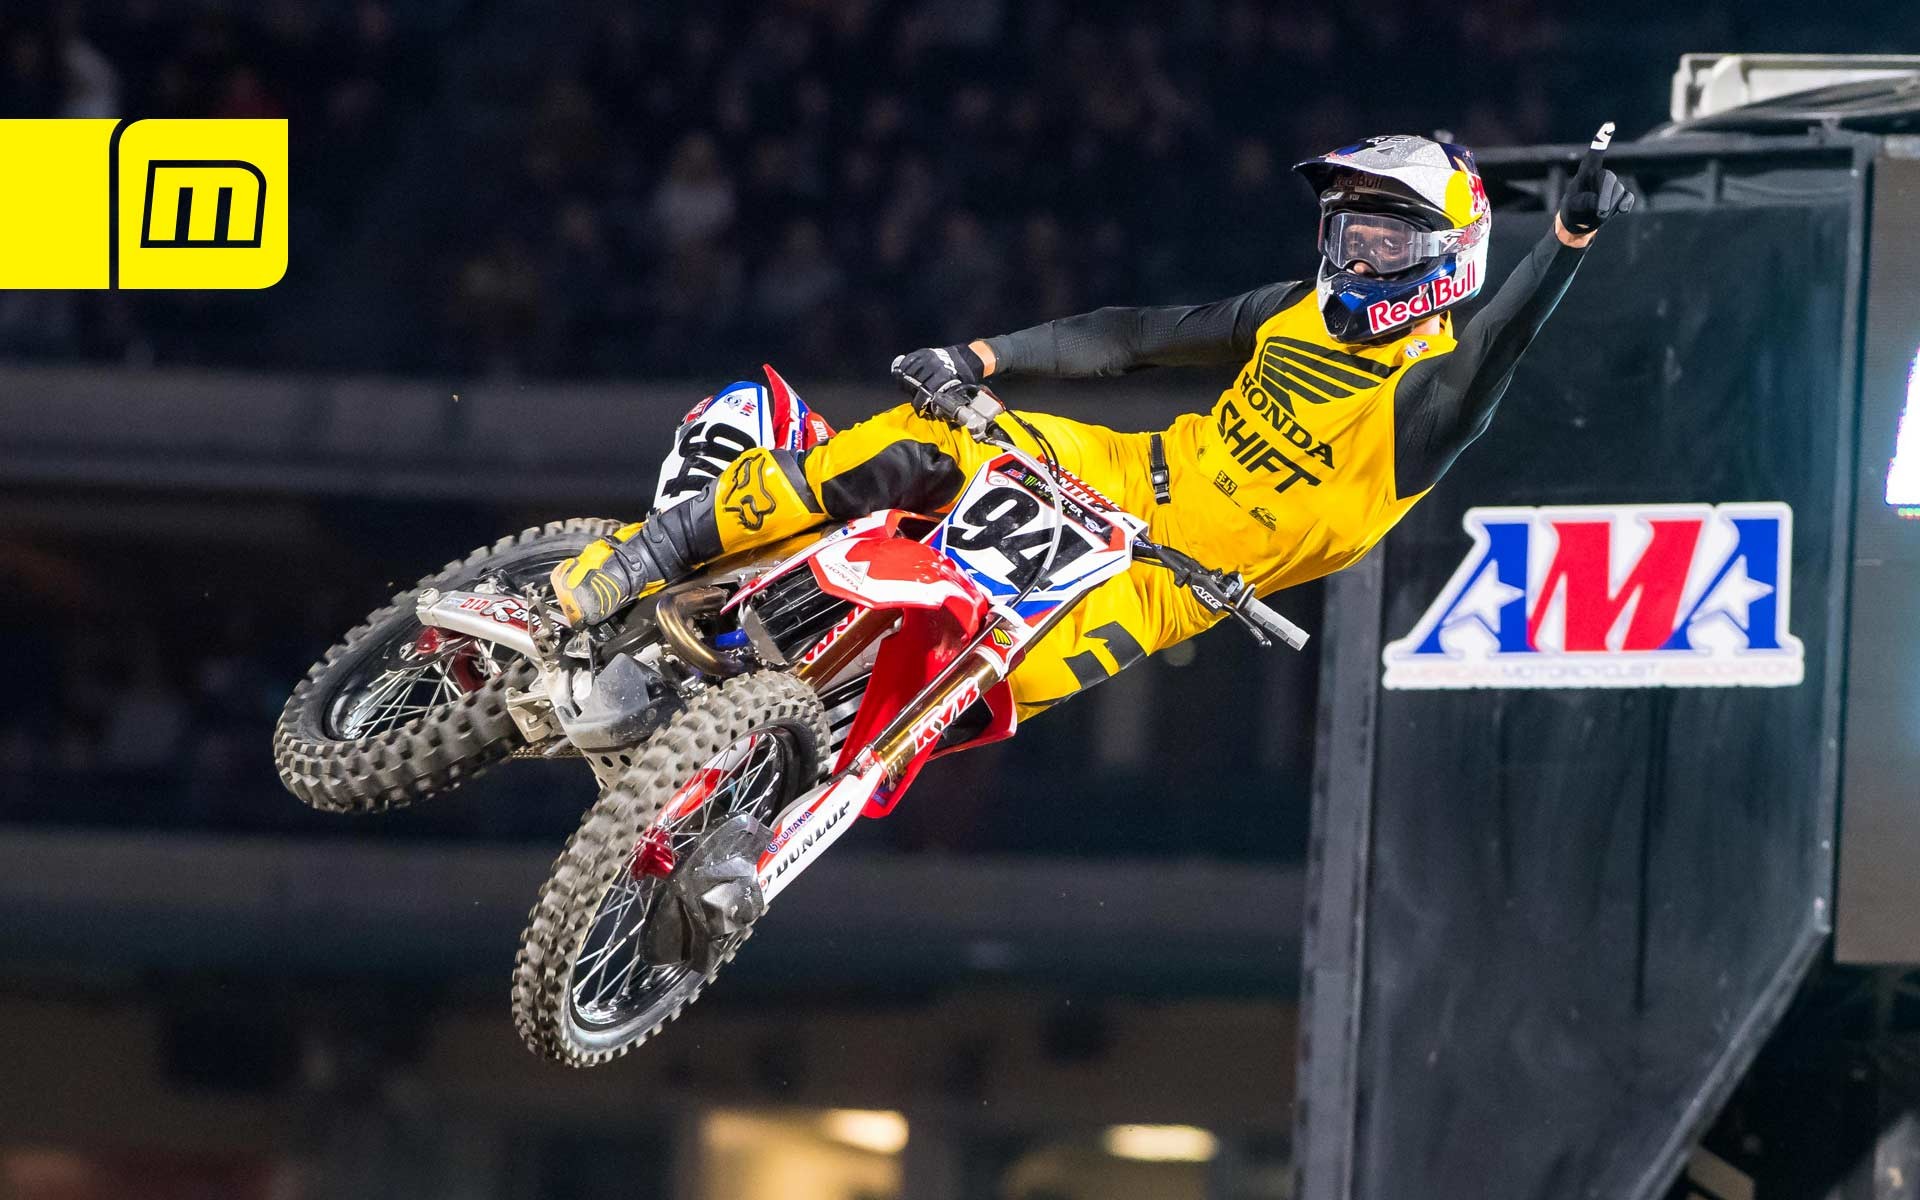 1920x1200 ... 2017 Monster Energy AMA Supercross Championship. The German rider  claimed a commanding win over defending multi-time 450SX champion, Ryan  Dungey, ...